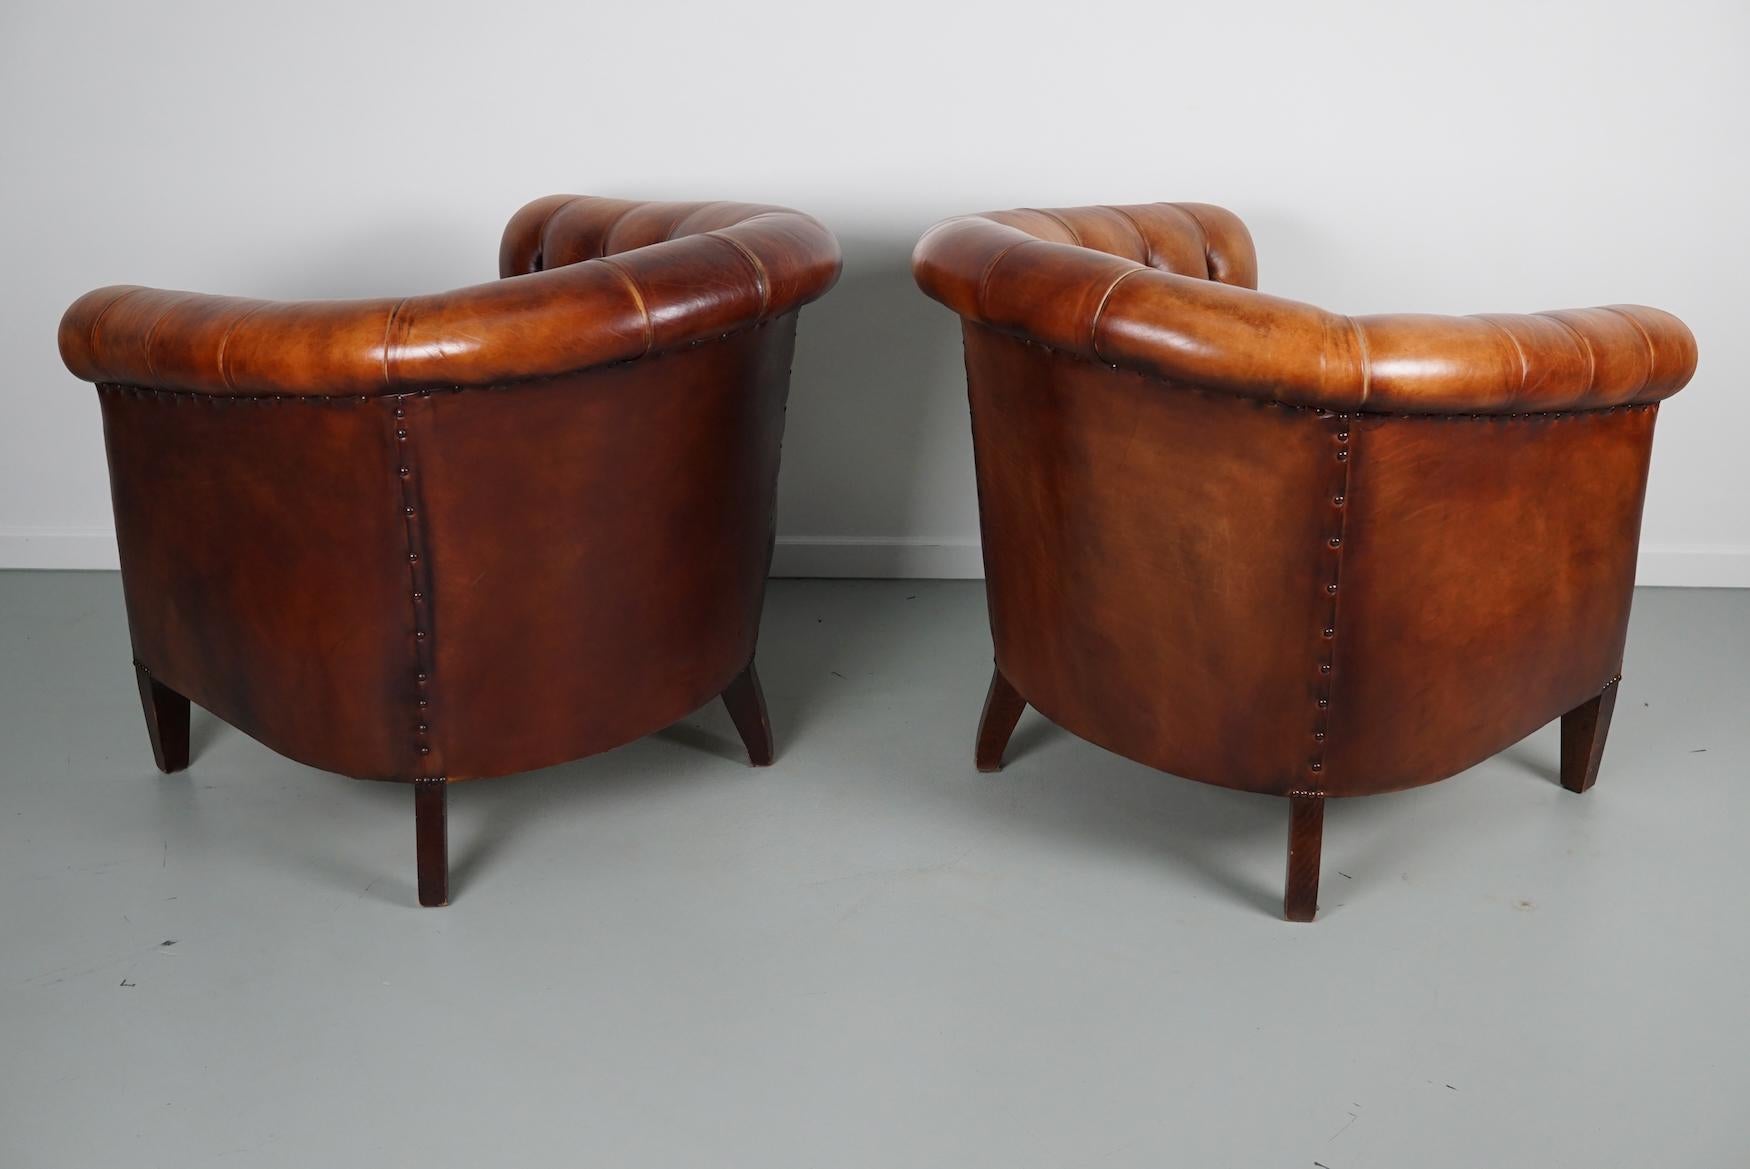 Vintage Dutch Chesterfield Cognac Leather Club Chairs, Set of 2 11